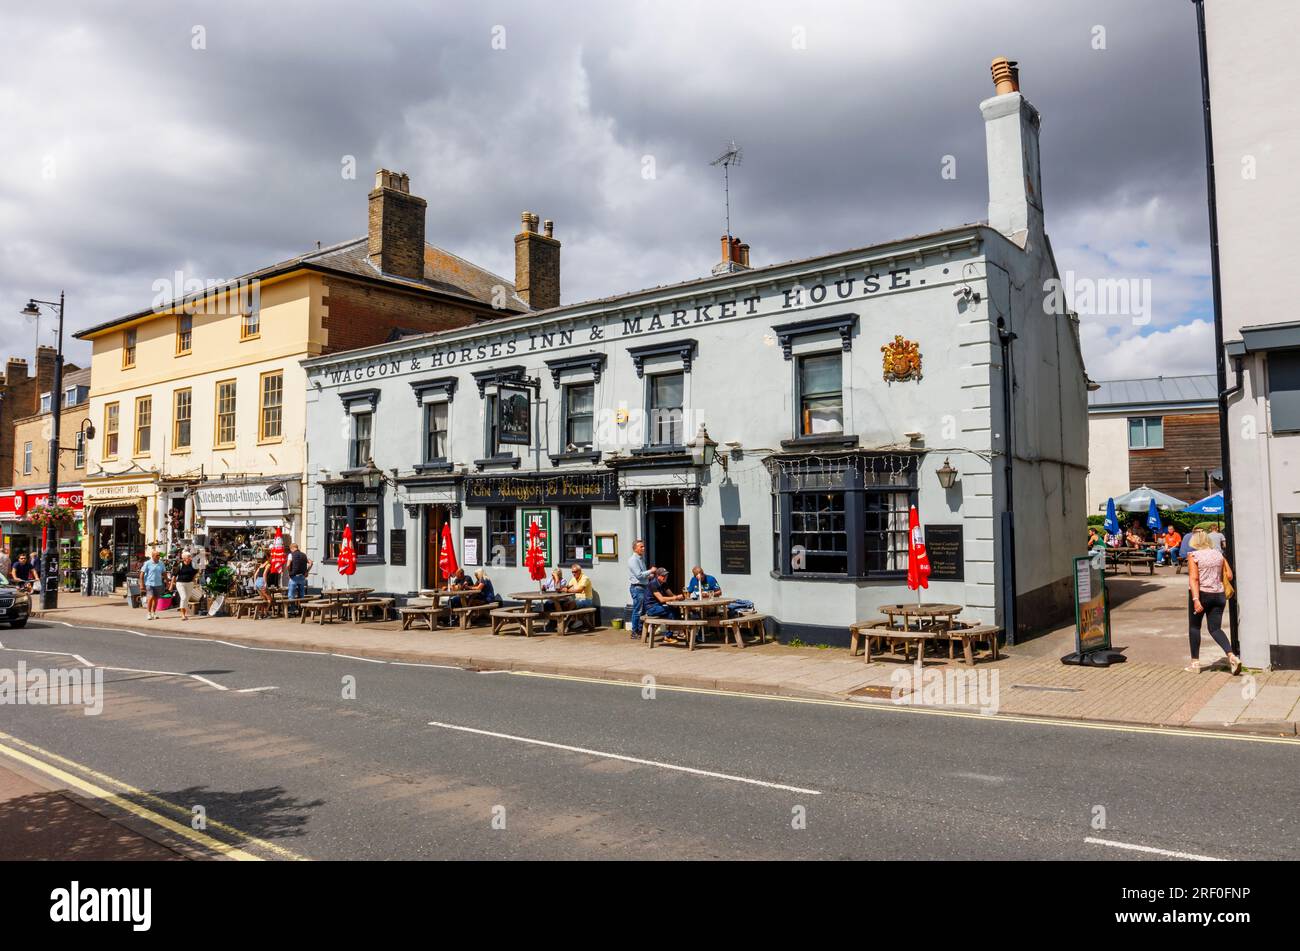 The Waggon & Horses Inn & Market House roadside pub in High Street, Newmarket, a market town in the West Suffolk district of Suffolk, east England Stock Photo